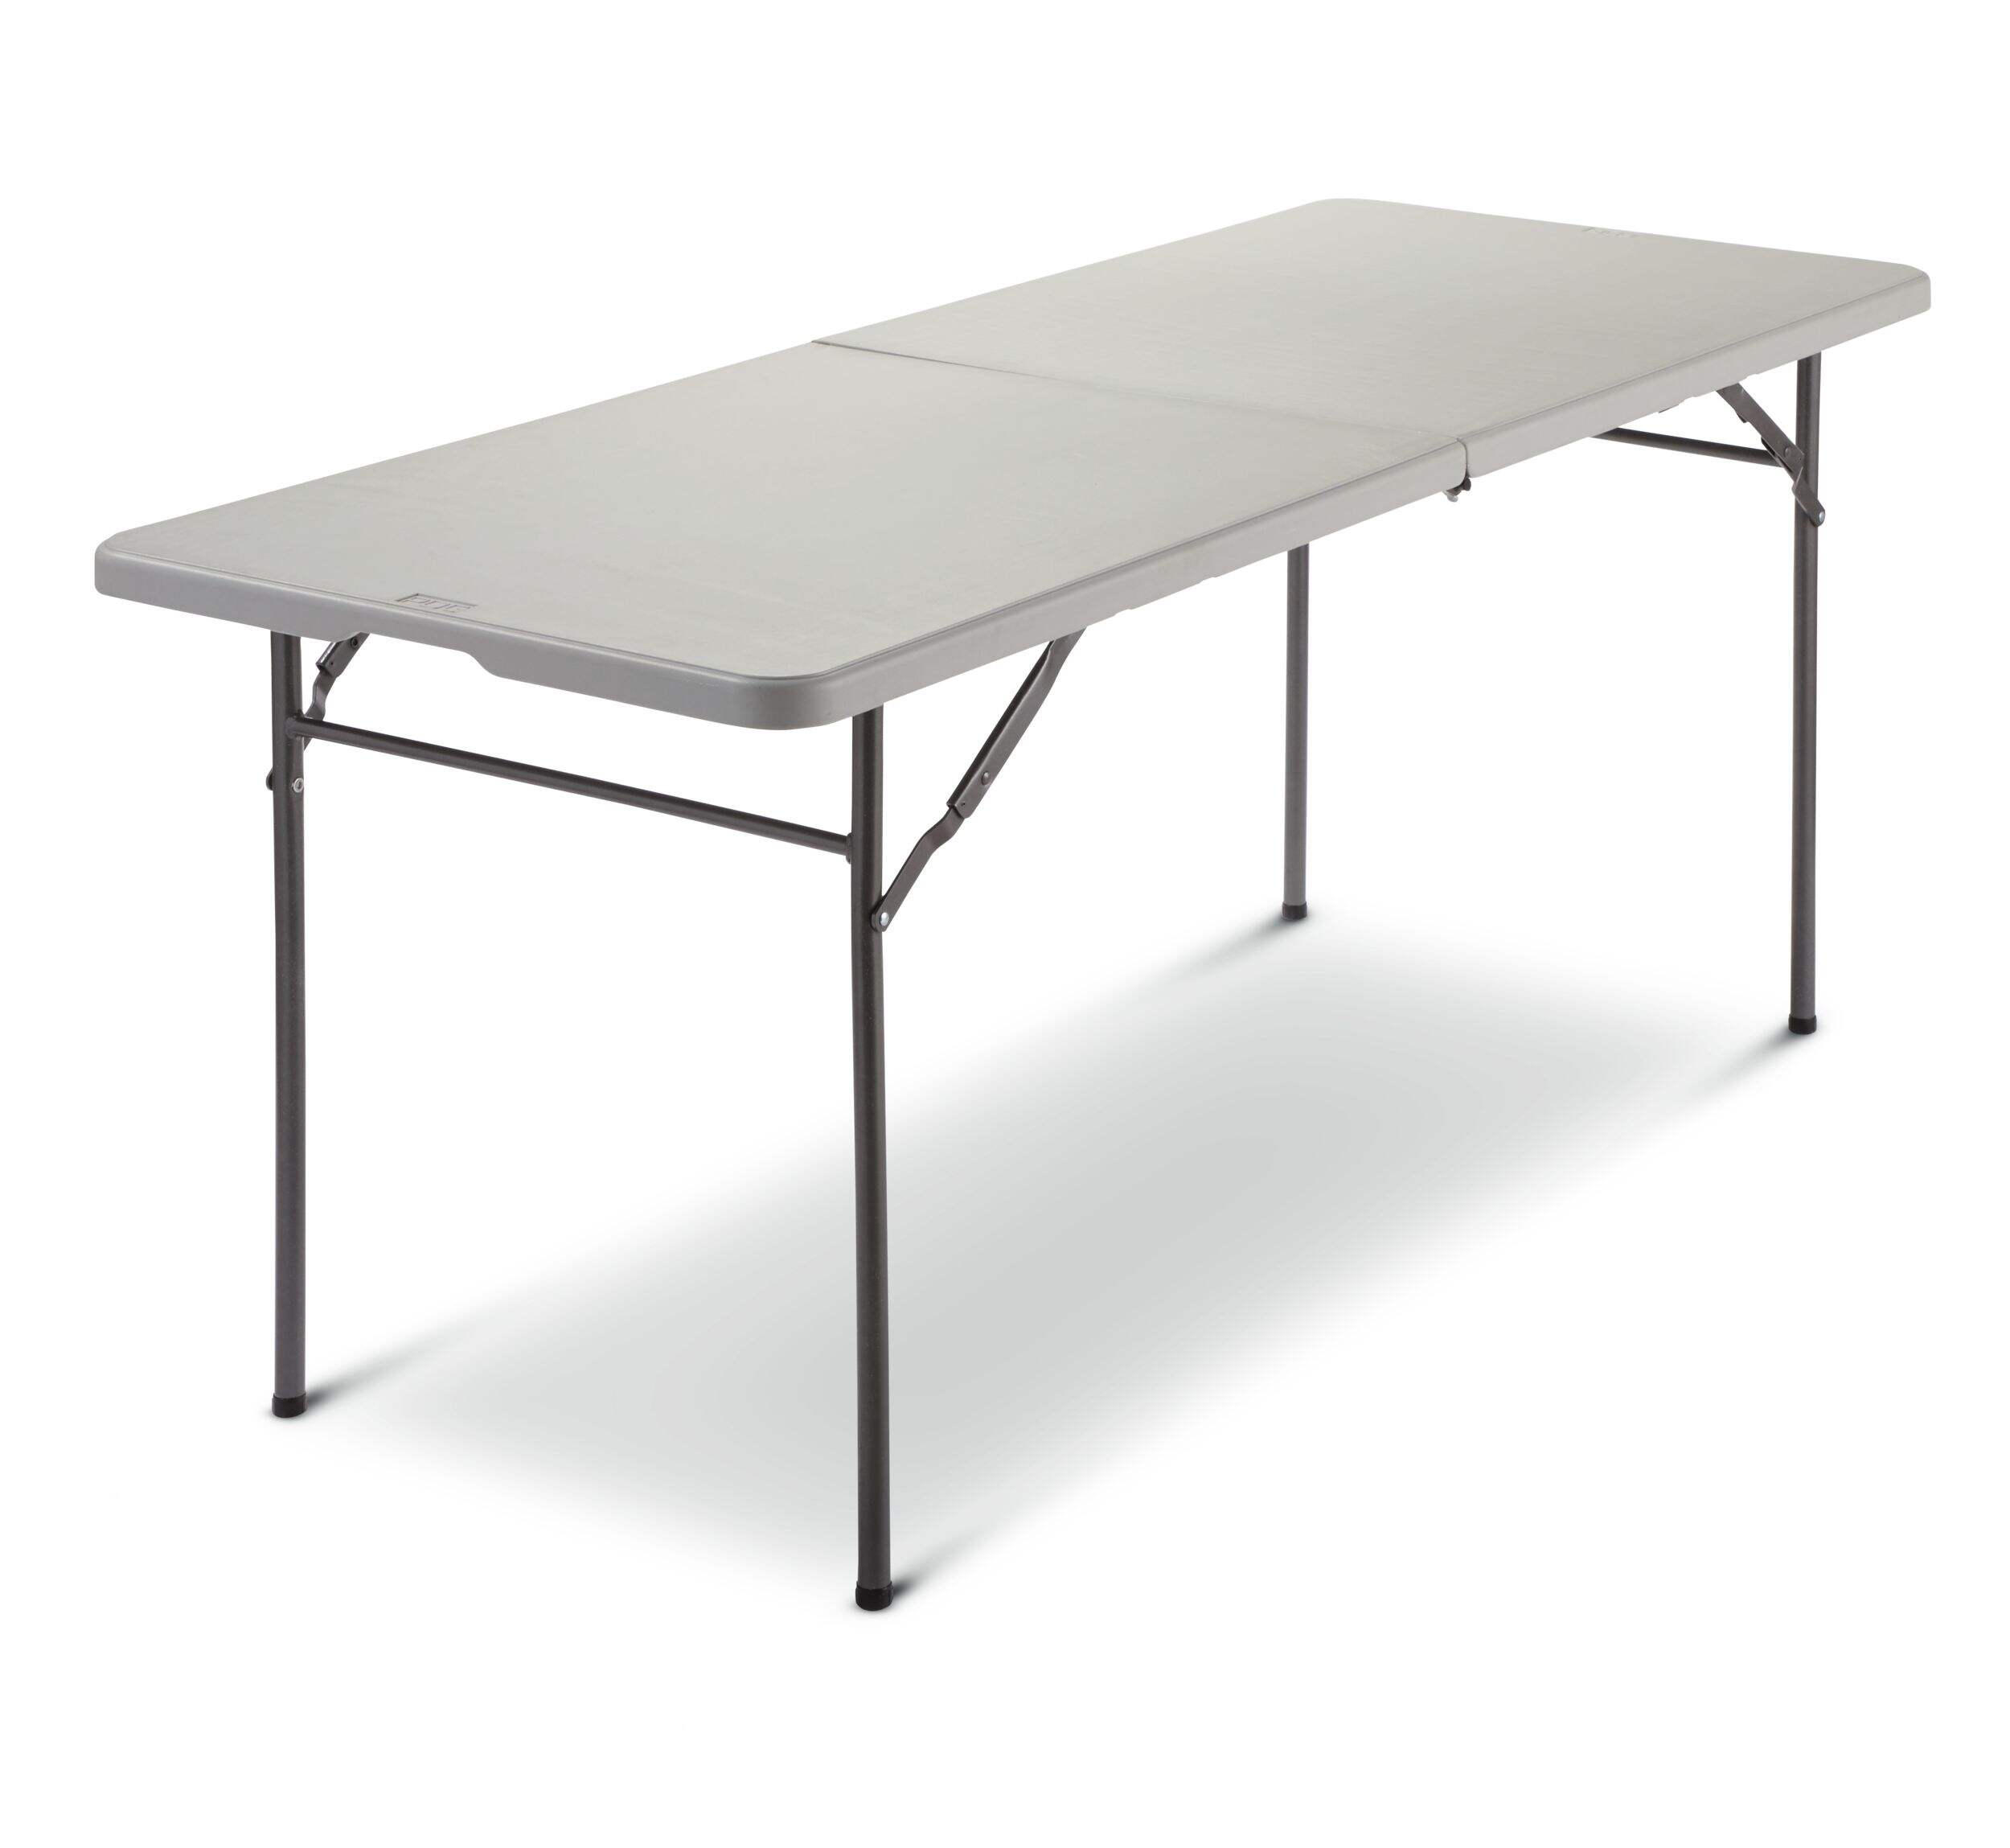 For Living 6-ft Portable Plastic & Metal Folding Table with Handle ...